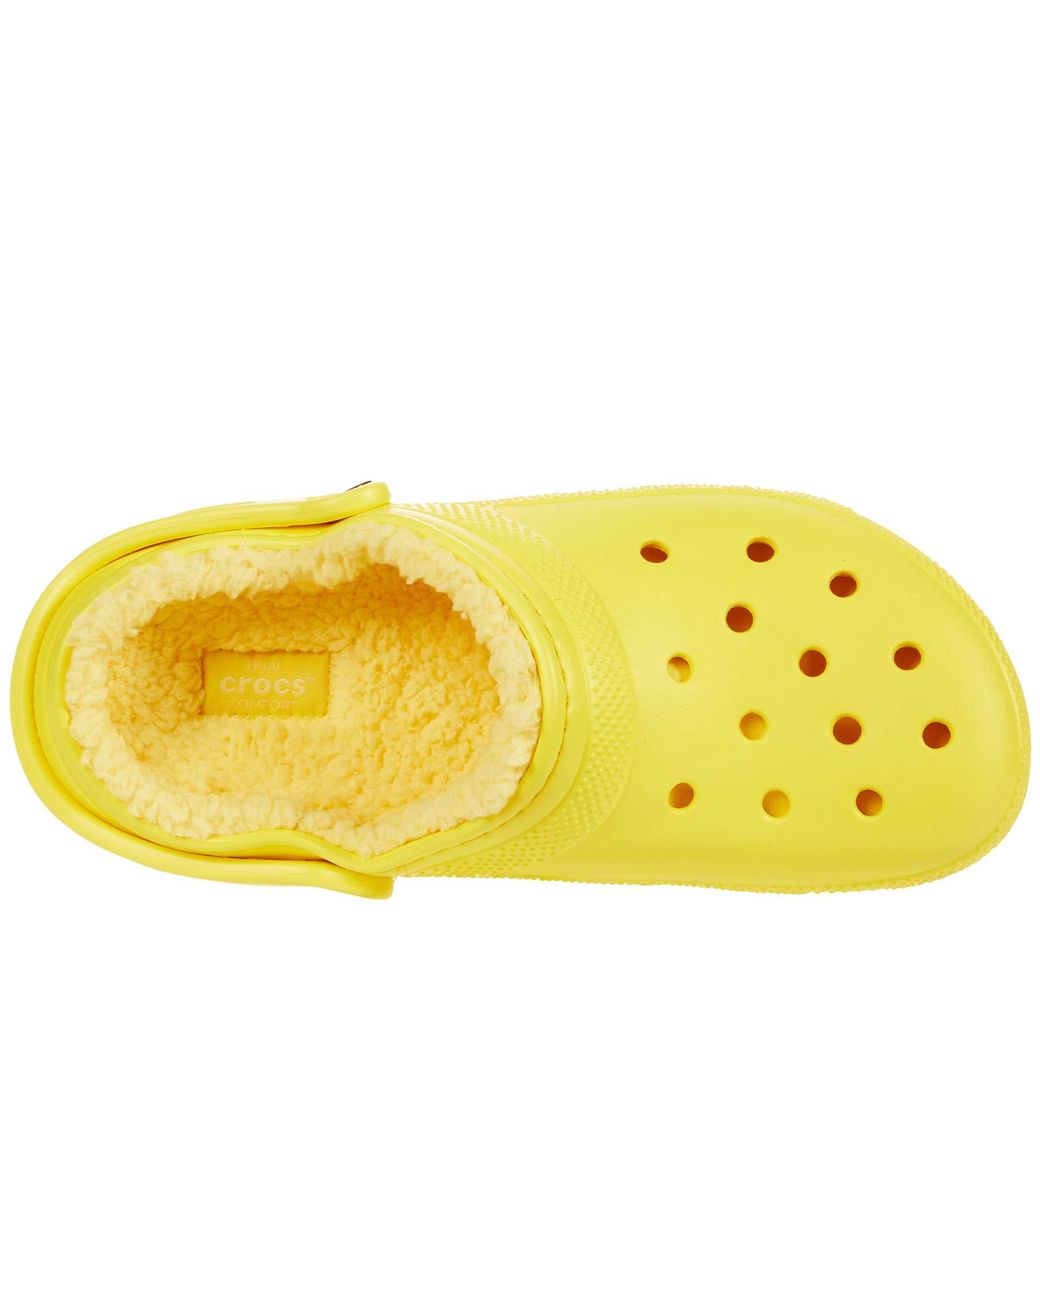 Crocs™ Classic Lined Clog in Yellow - Lyst